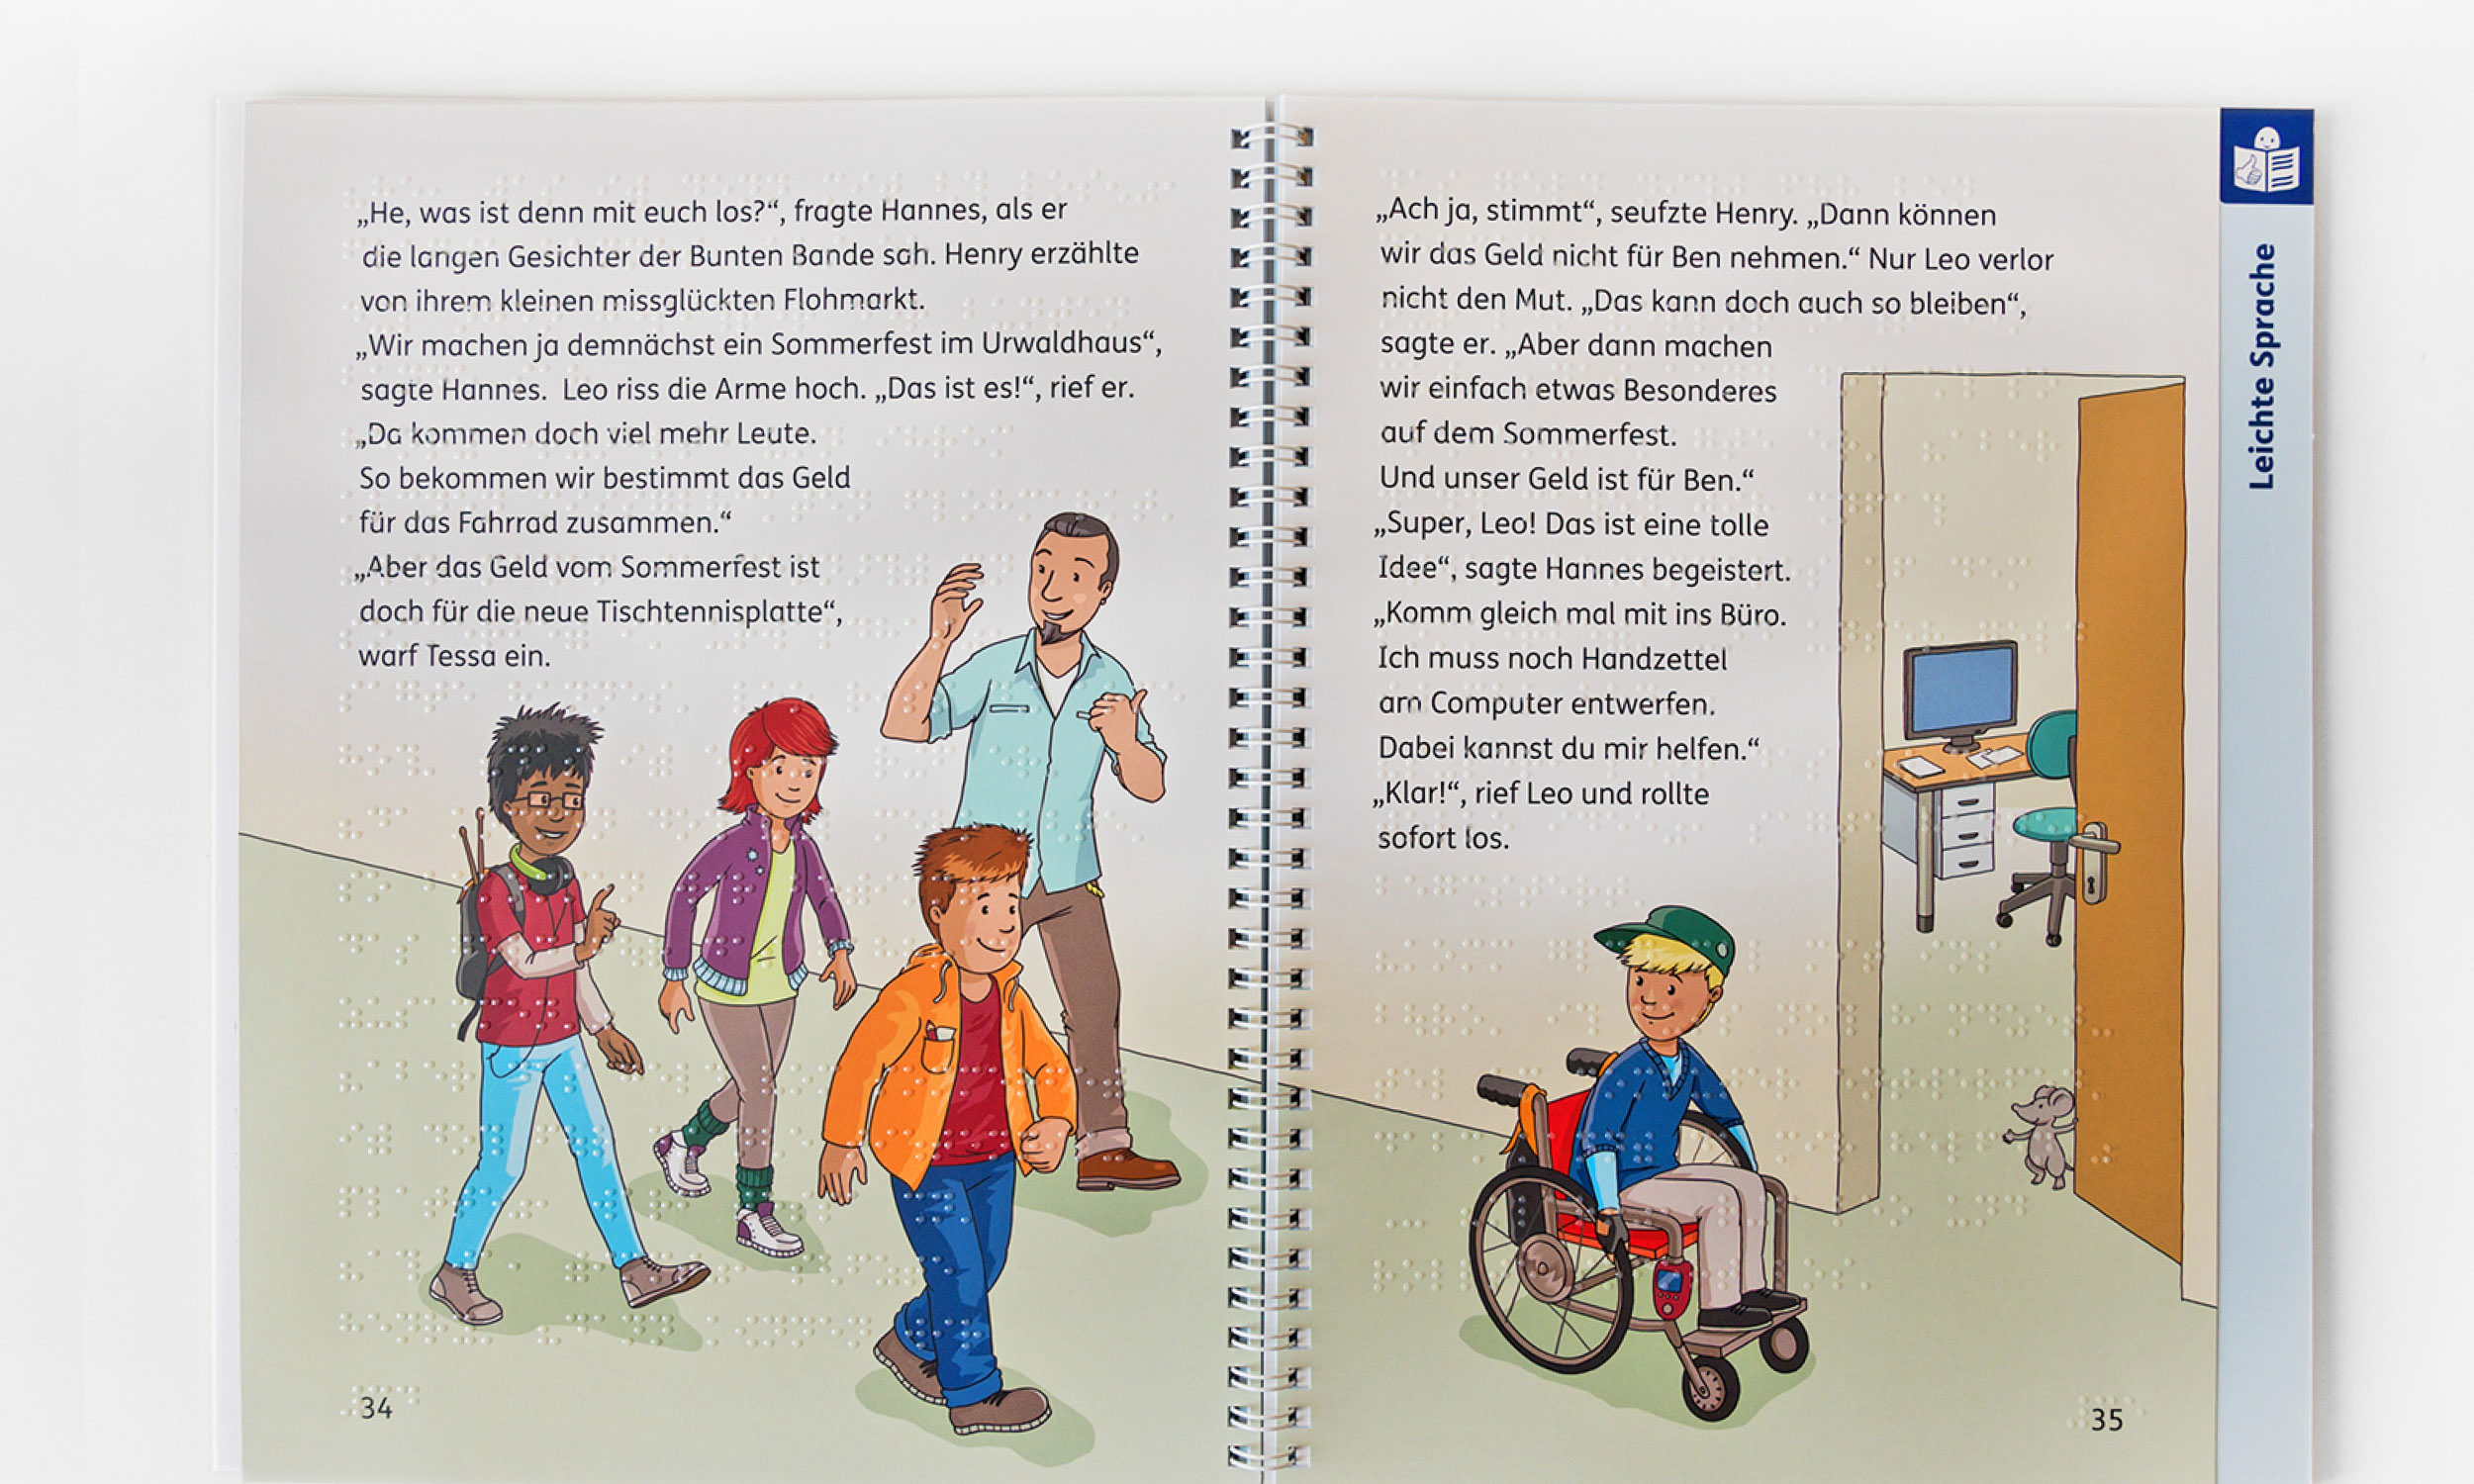 An open double page of the book. Across the entire format is an illustration of the colourful gang with educator Ben. Again, blackletter and braille are combined. The next easy-language page is already peeking out from the right edge of the book.